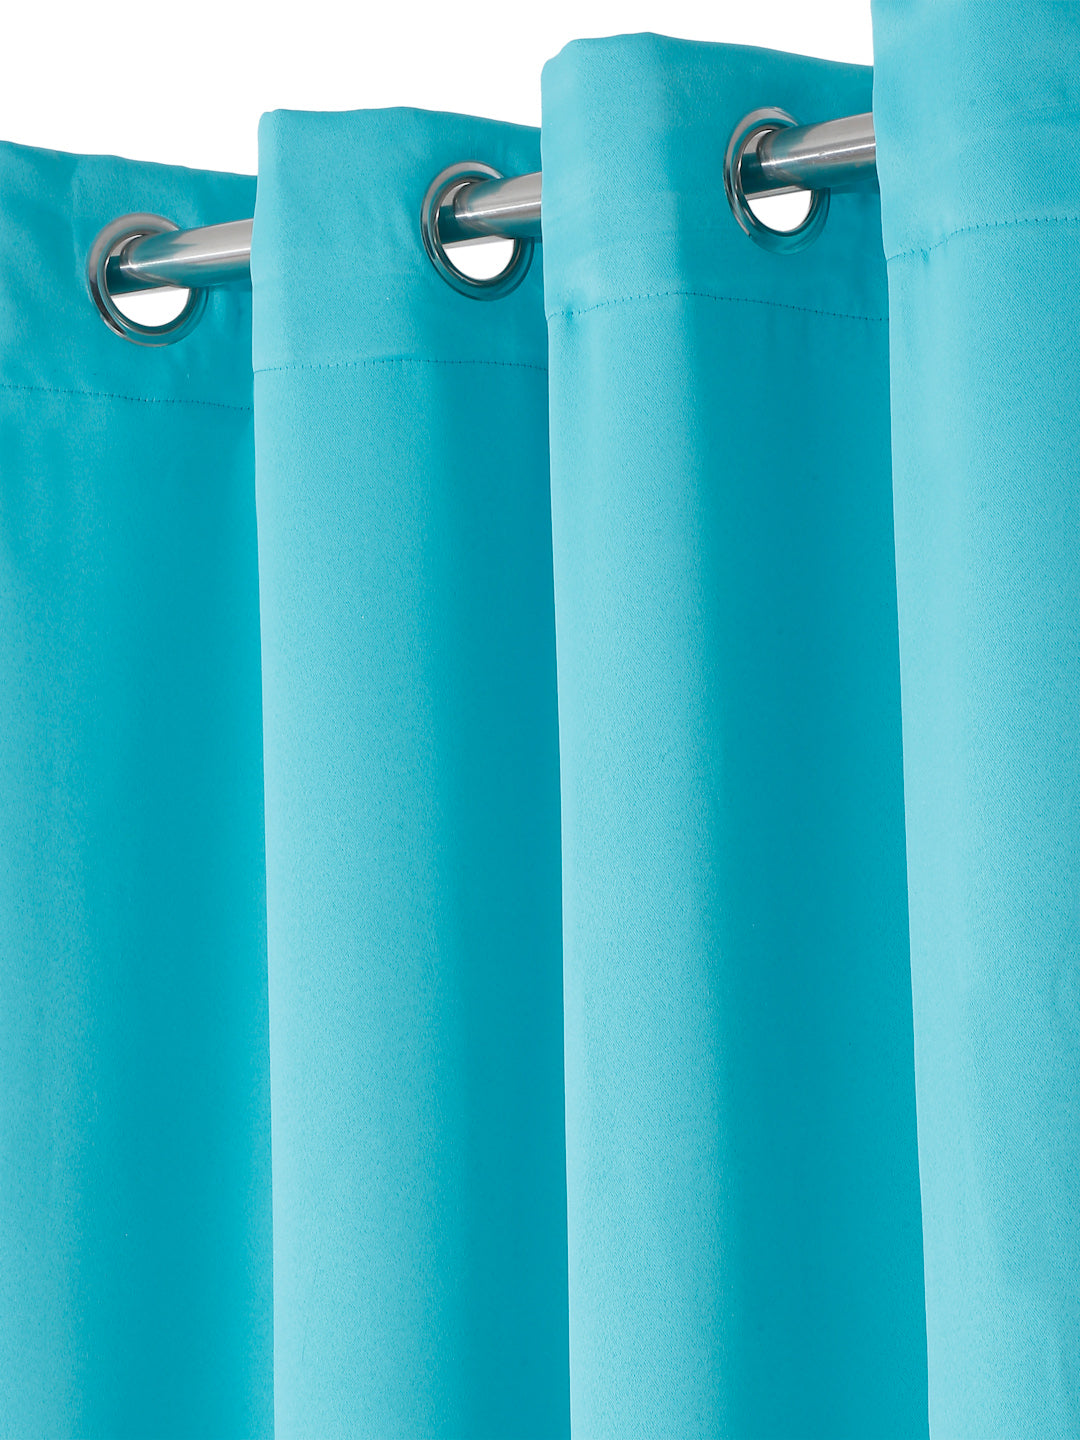 Pack of 2 Polyester Blackout Solid Door Curtains- Turquoise